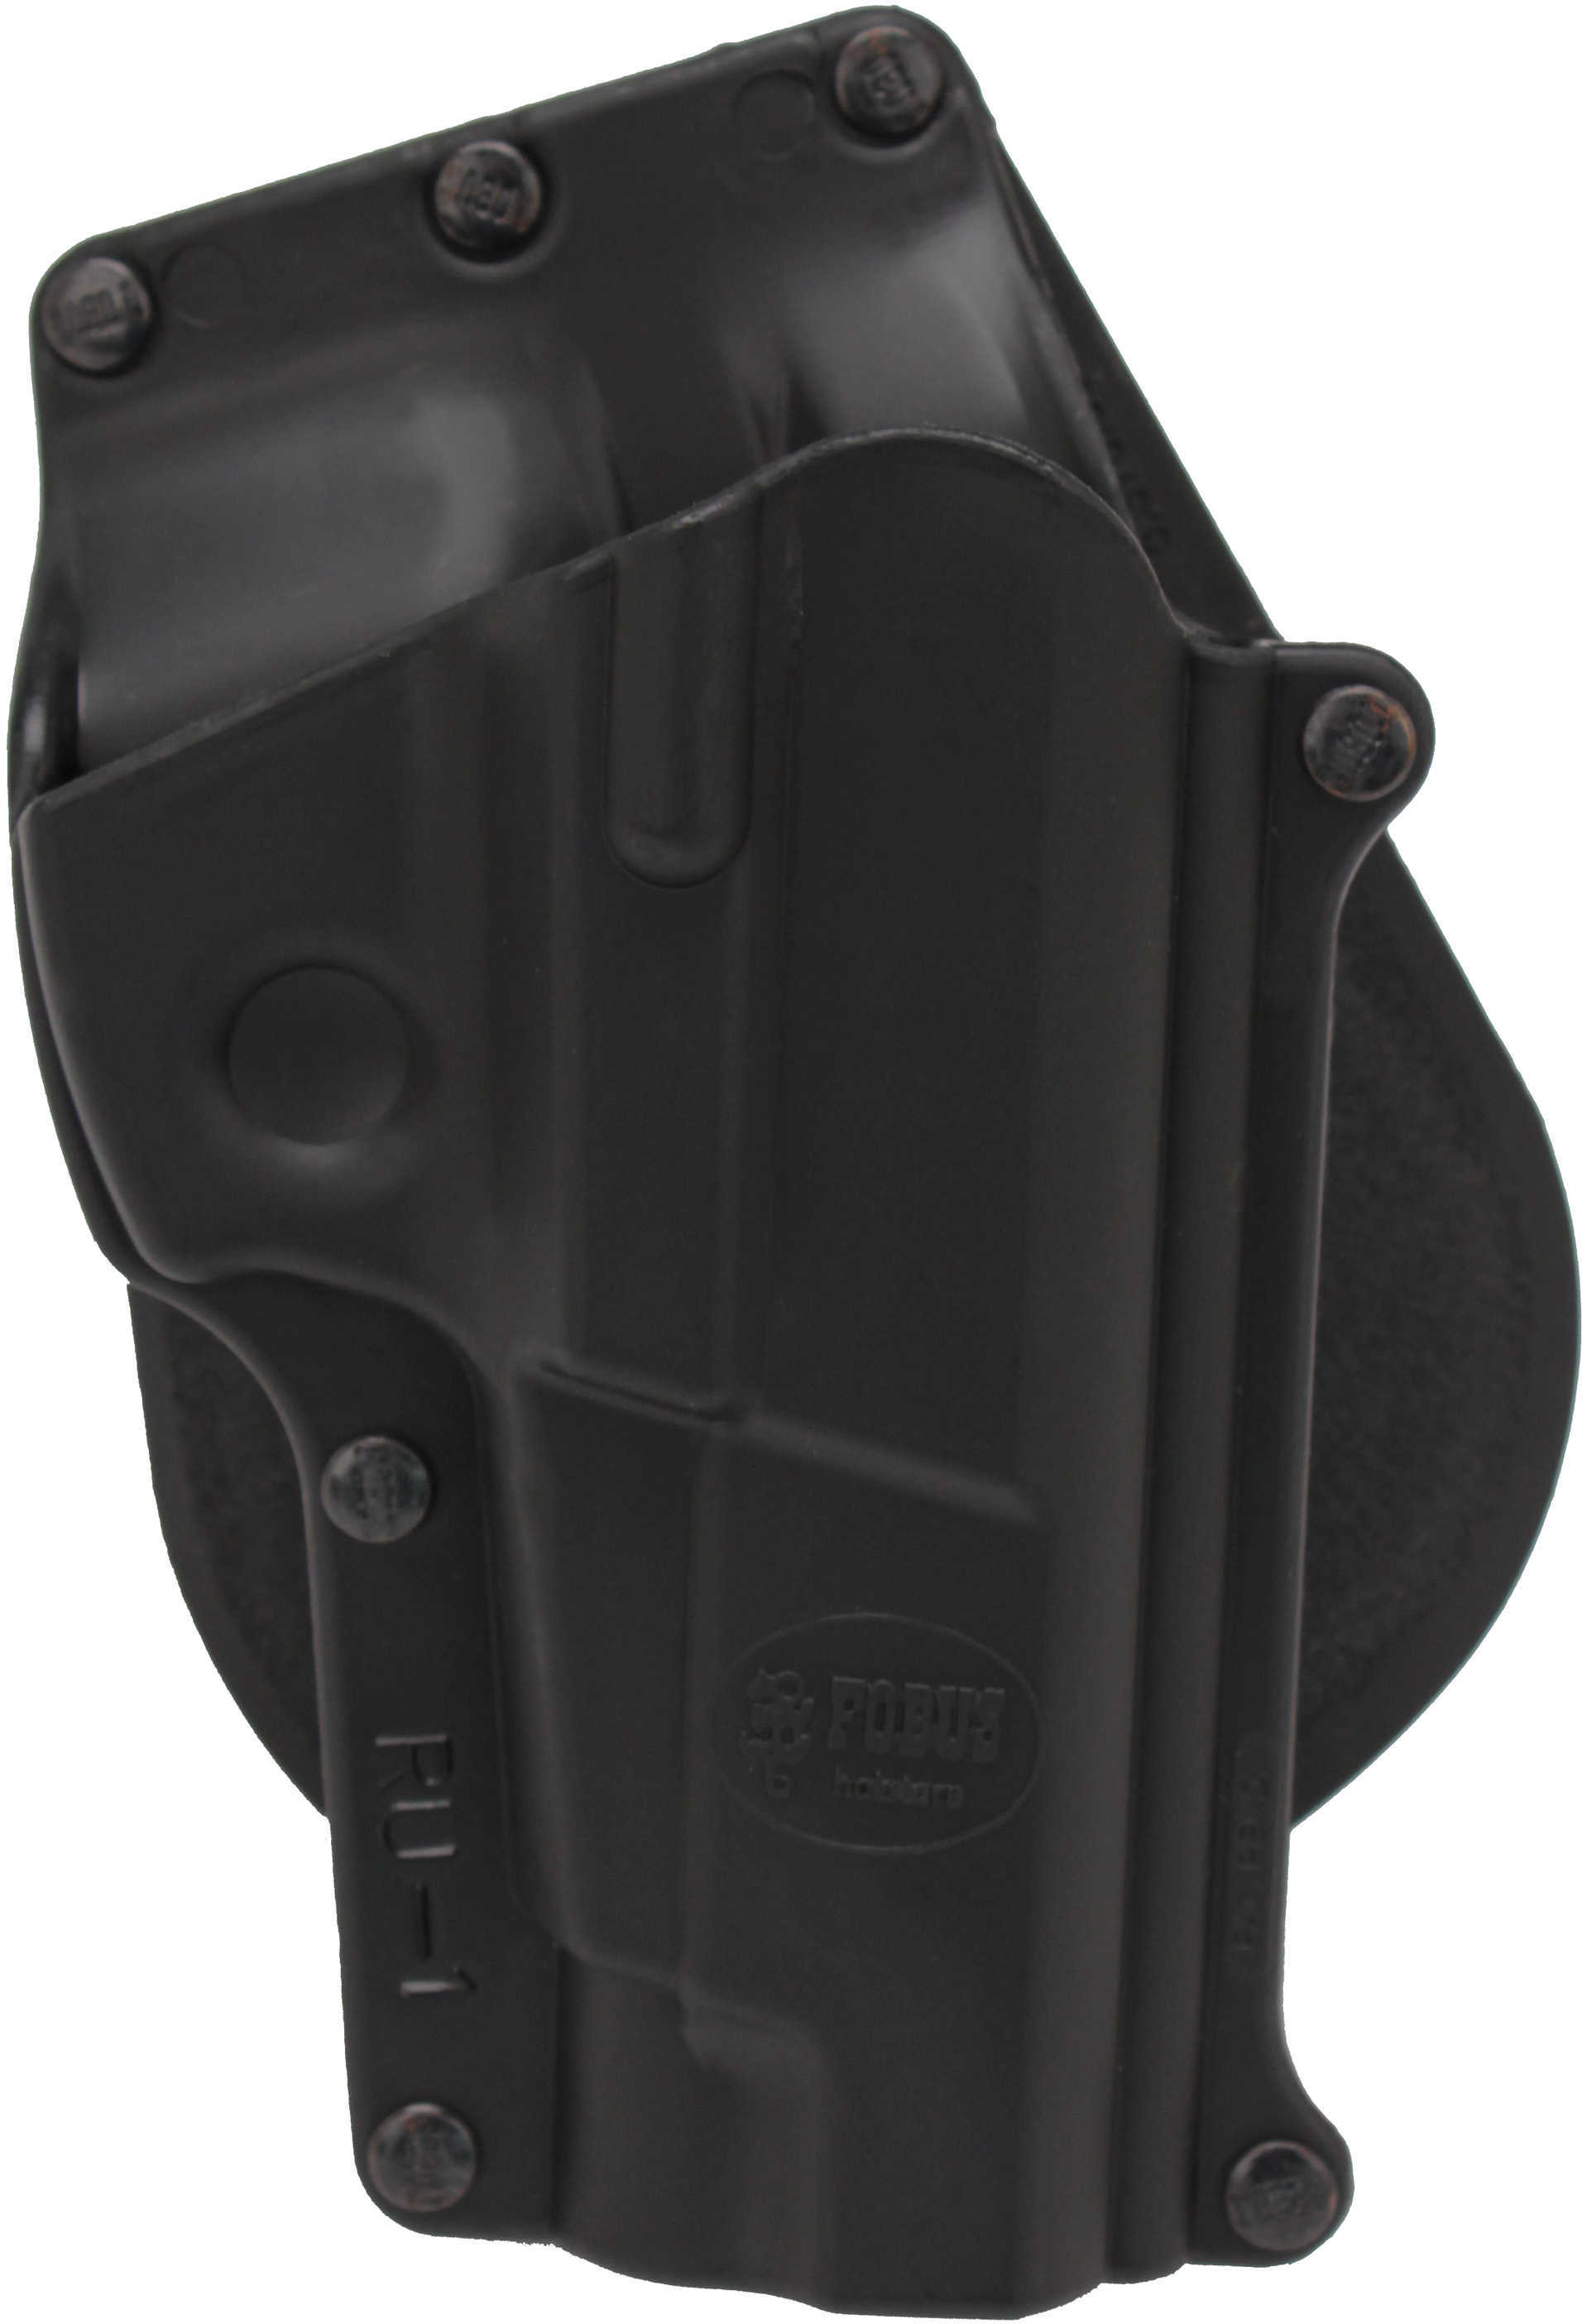 Fobus Paddle Holster Fits Ruger P85P/89 Lg. Auto 9mm/.40 caliber Right Hand Kydex Black RU1